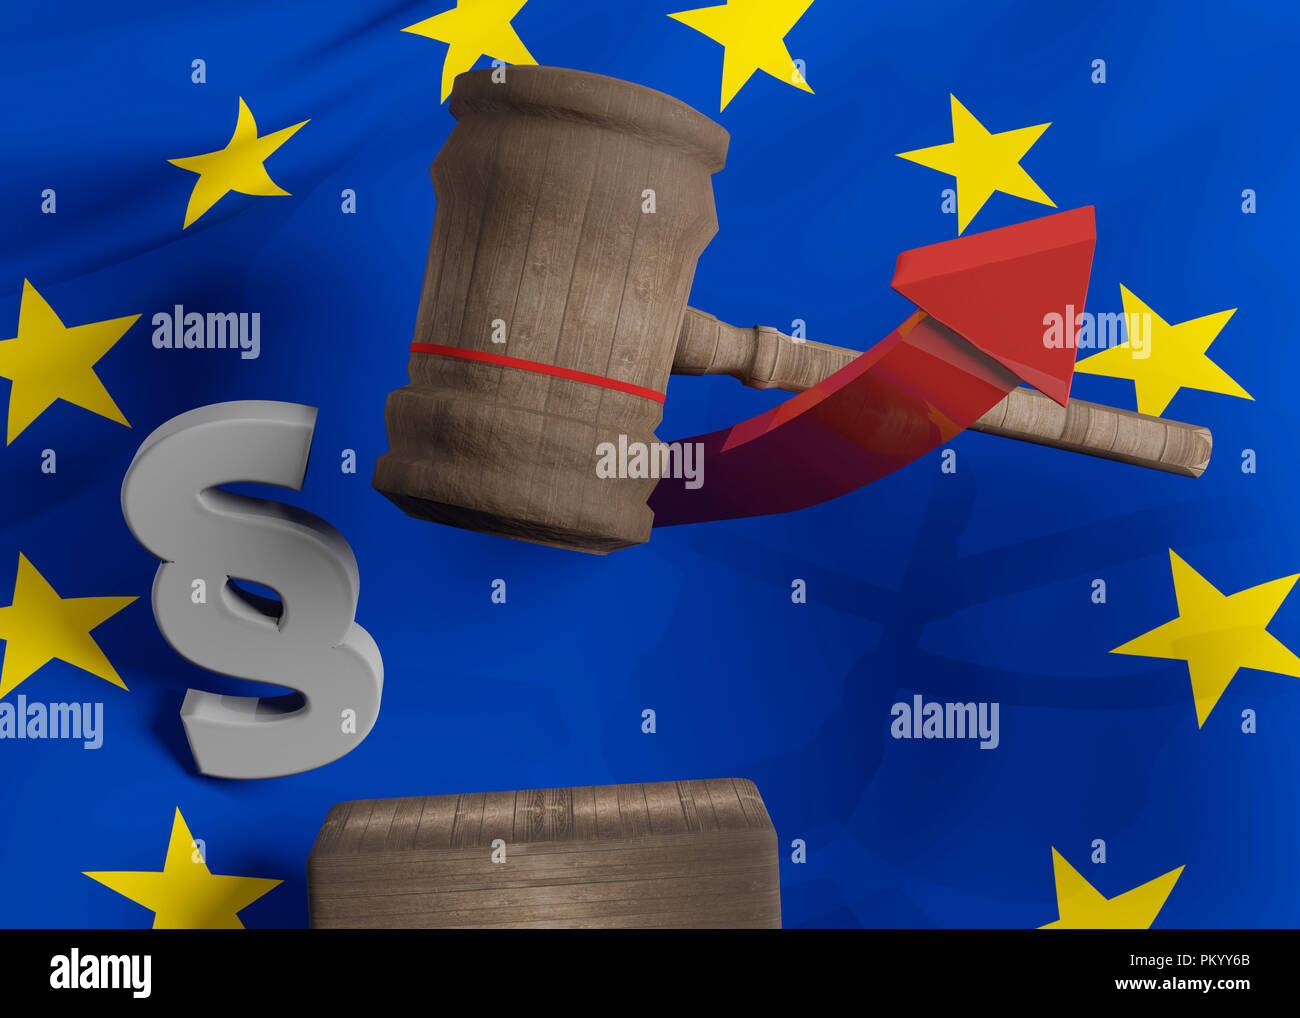 flag of Europe with wooden judge gavel 3D-Illustration Stock Photo